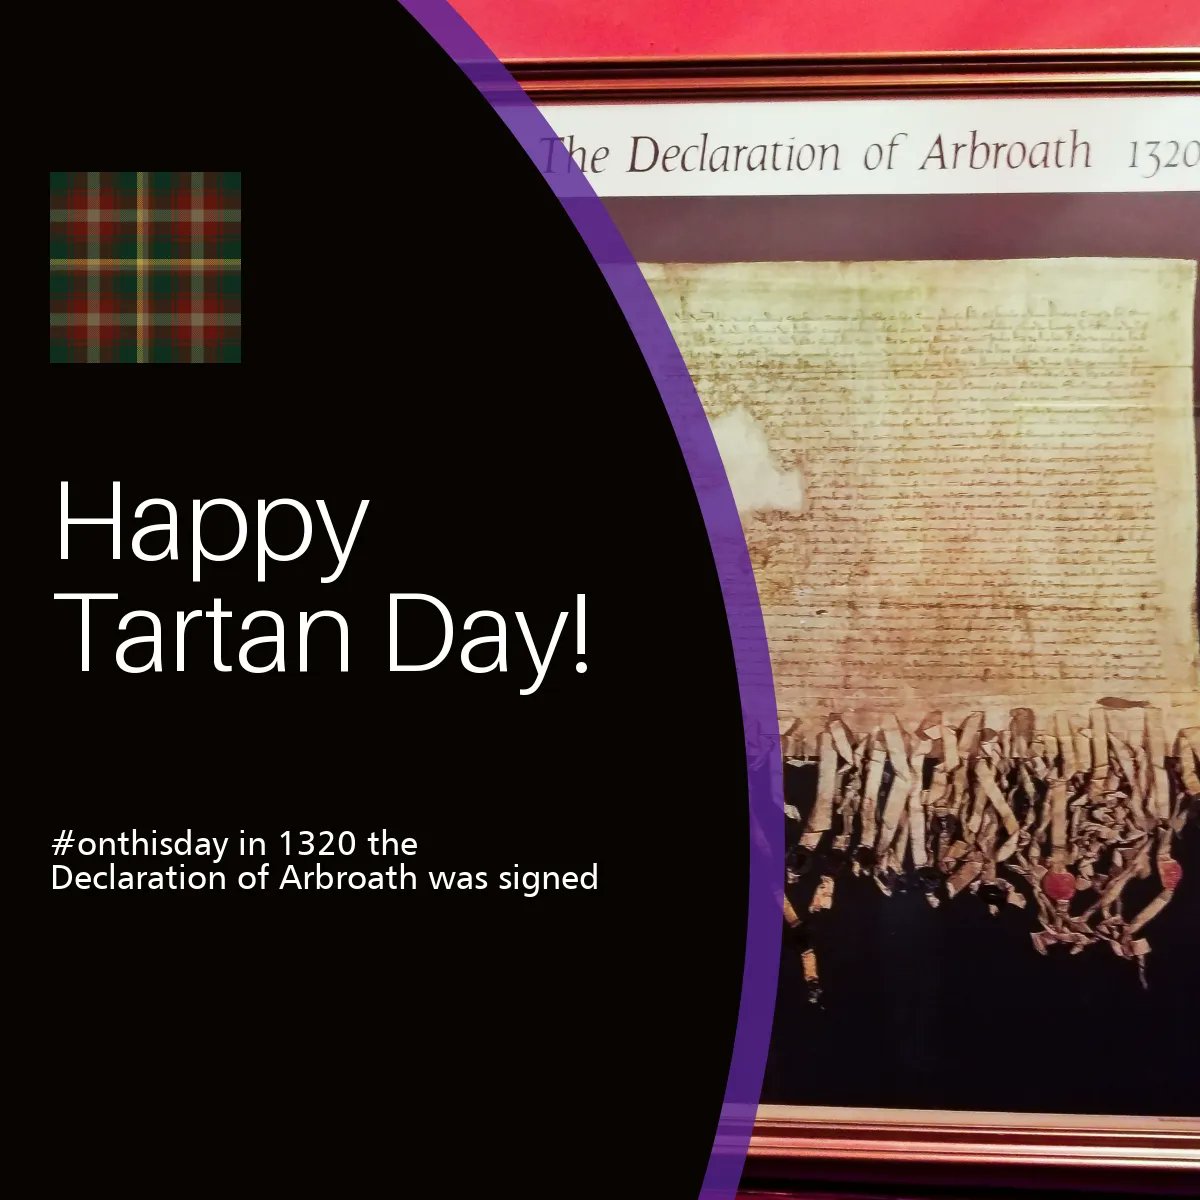 In North America, today is National Tartan Day. It also marks the 702nd anniversary of The Declaration of Arbroath. Show us your #tartan!!⠀
⠀
#Arbroath #declarationofarbroath #NationalTartanDay